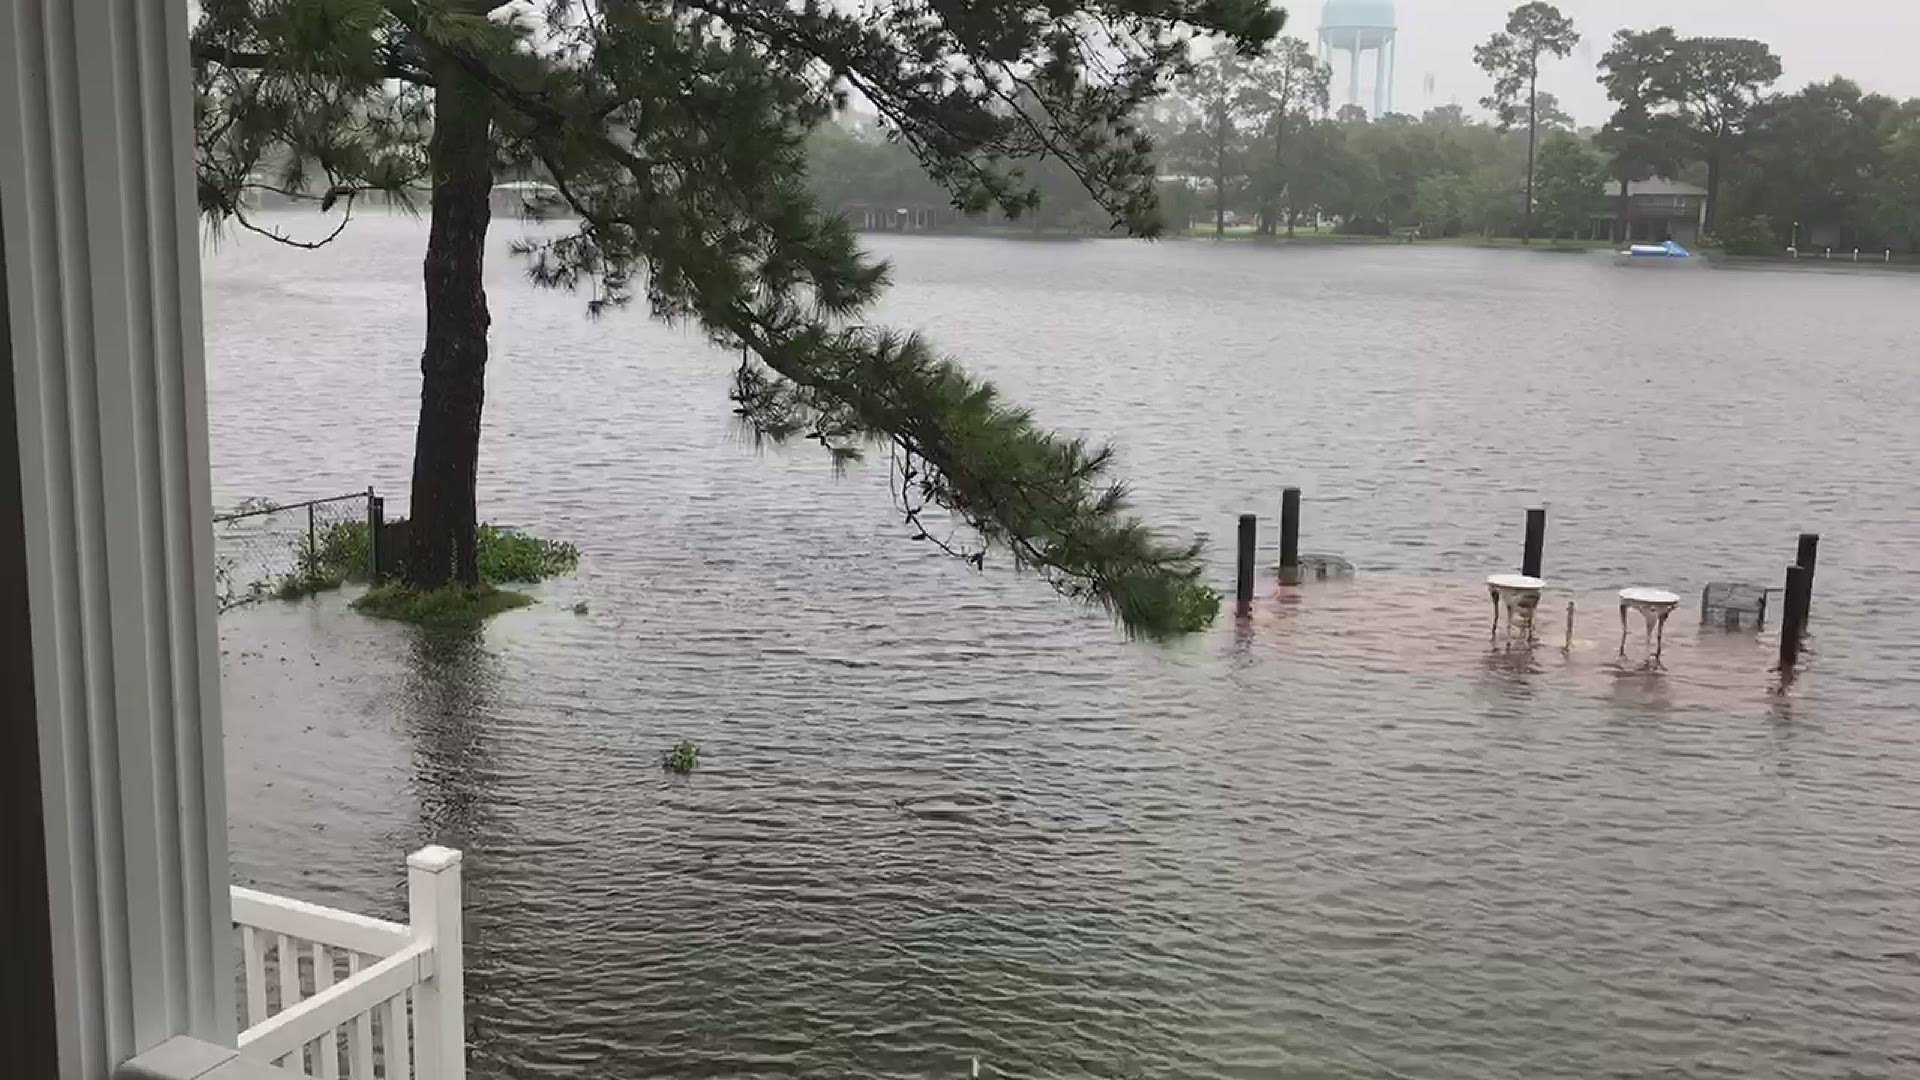 My backyard on Palmlake in Slidell at 3:00 pm . Flooding ..
Lucien Eyraud
Credit: Lucien  Eyraud